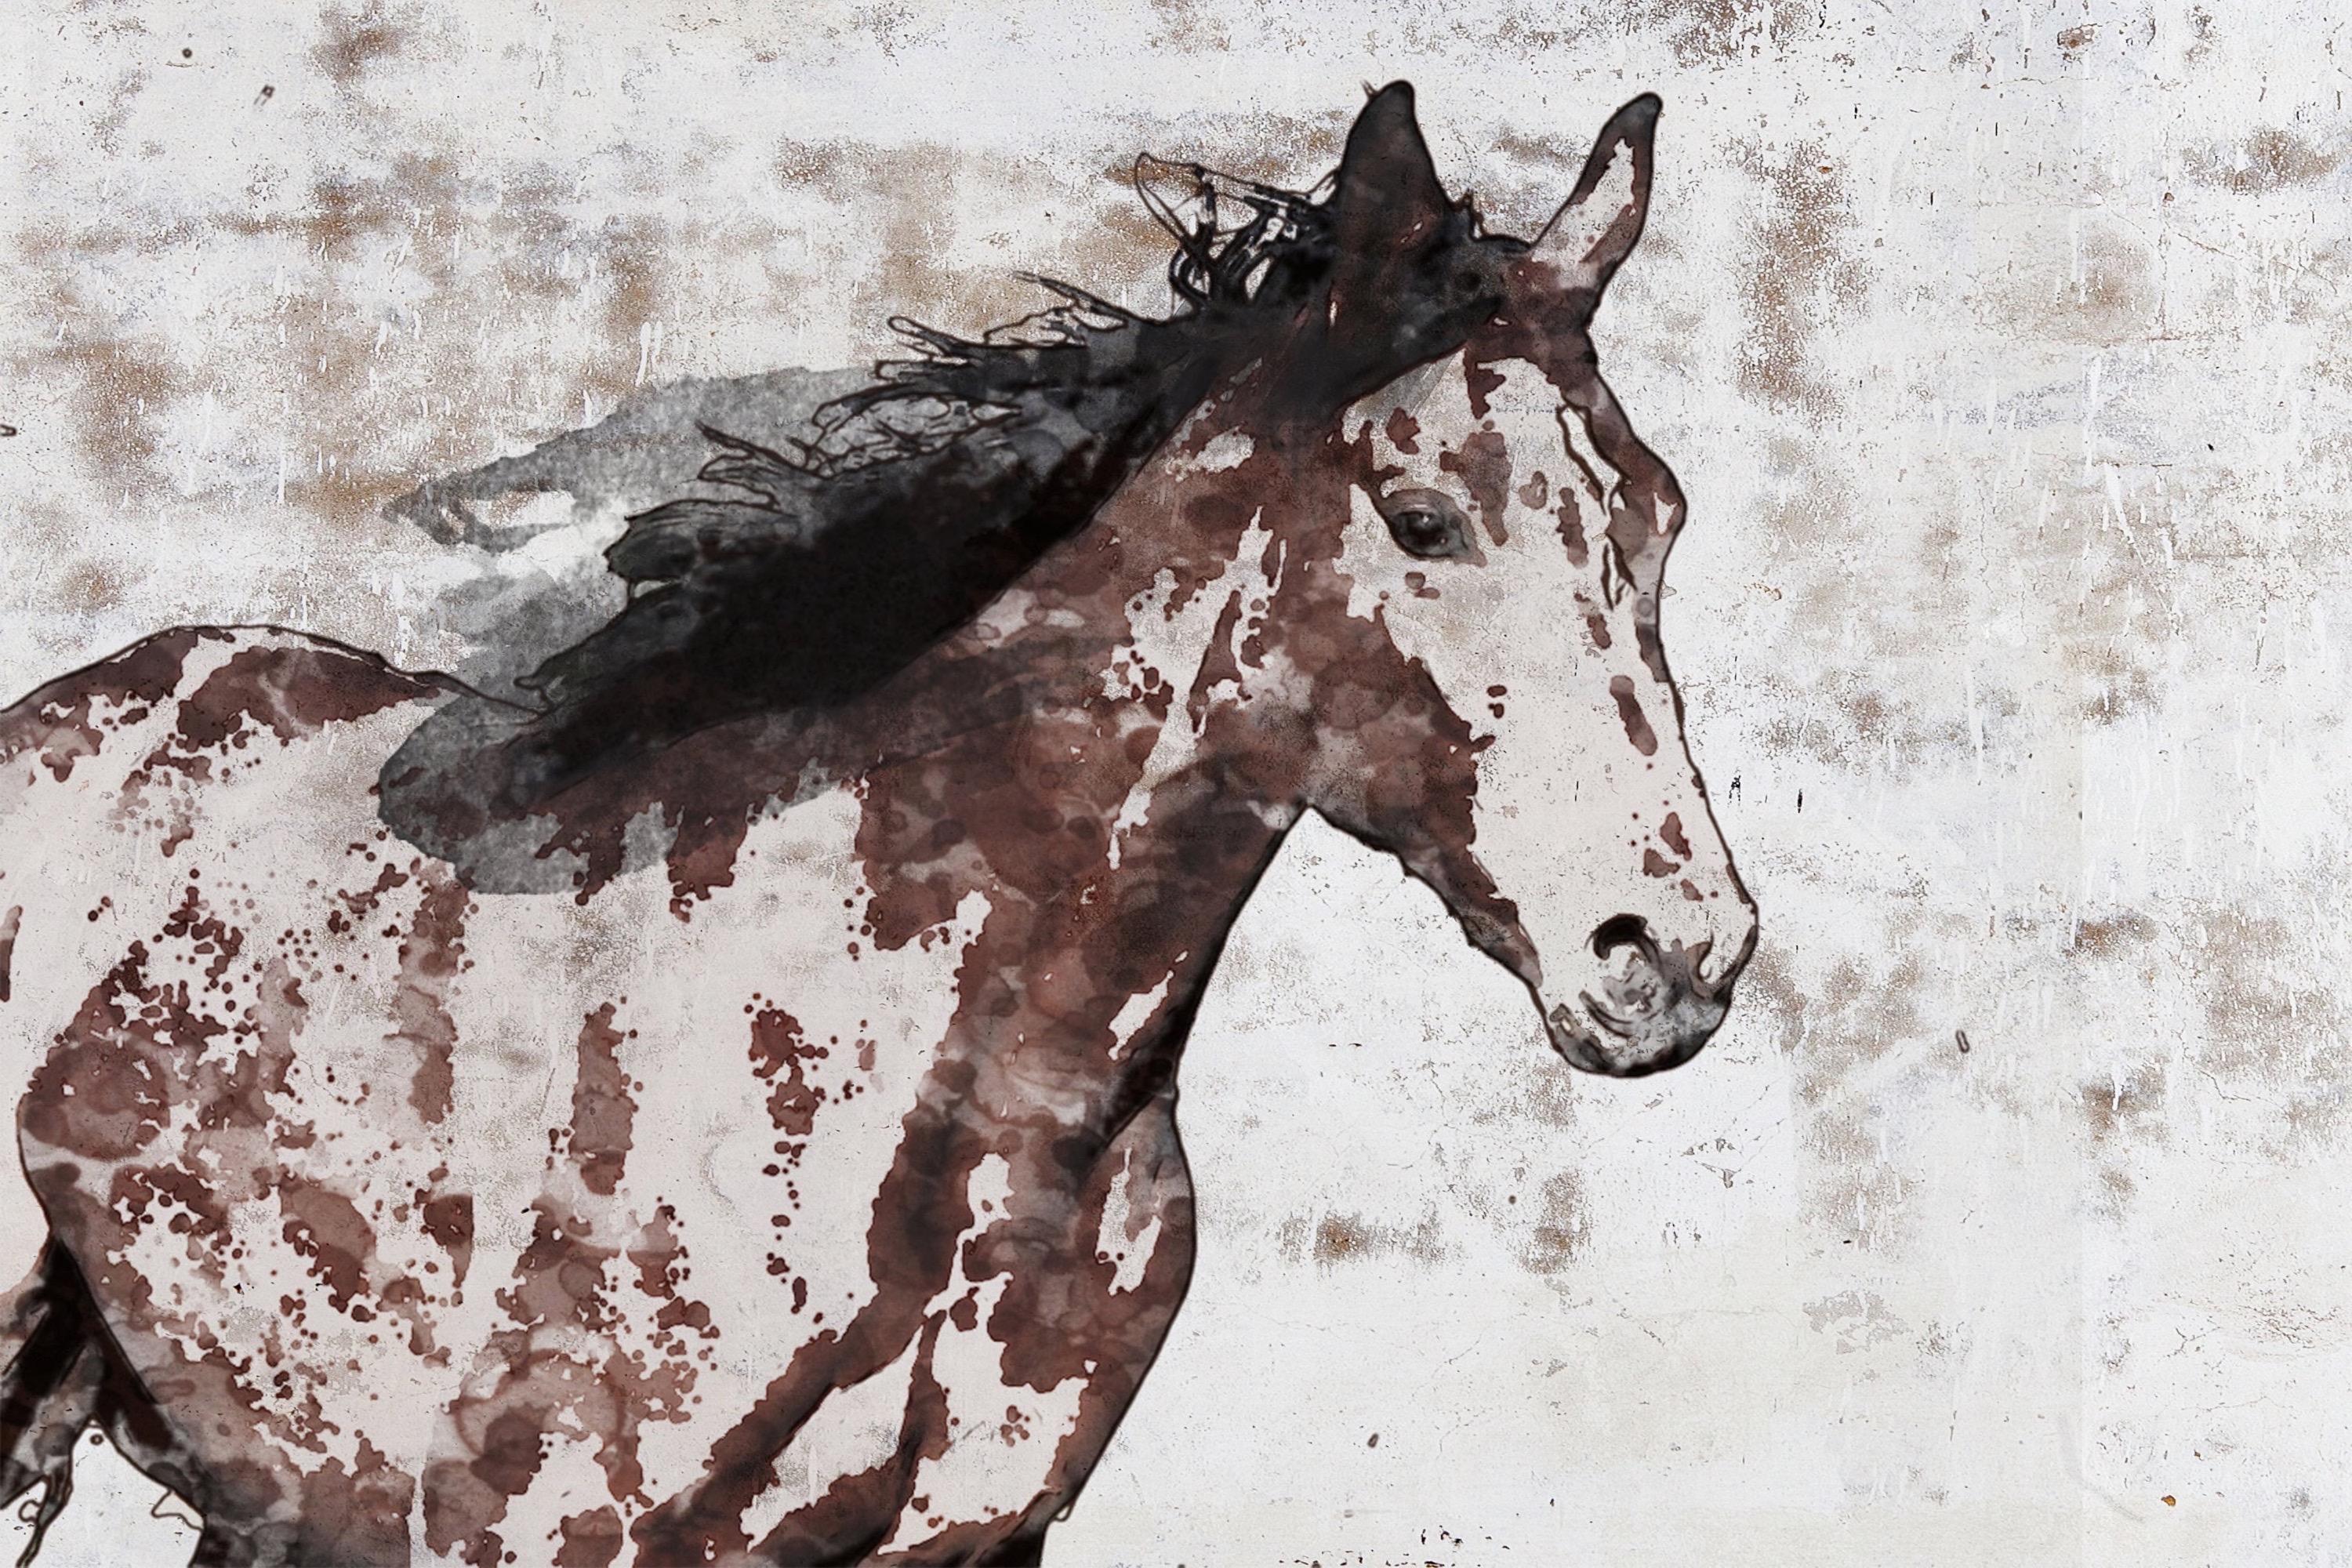 Stallion Horse Painting Rustic Horse Fine Art Hand Embellished Giclee on Canvas 

Collector's Edition Embellished Art Canvas Giclee With Brushstrokes and rich texture.

State-of-the-art HAND EMBELLISHED ∽ MUSEUM QUALITY ∽ DISPLAY READY Giclee